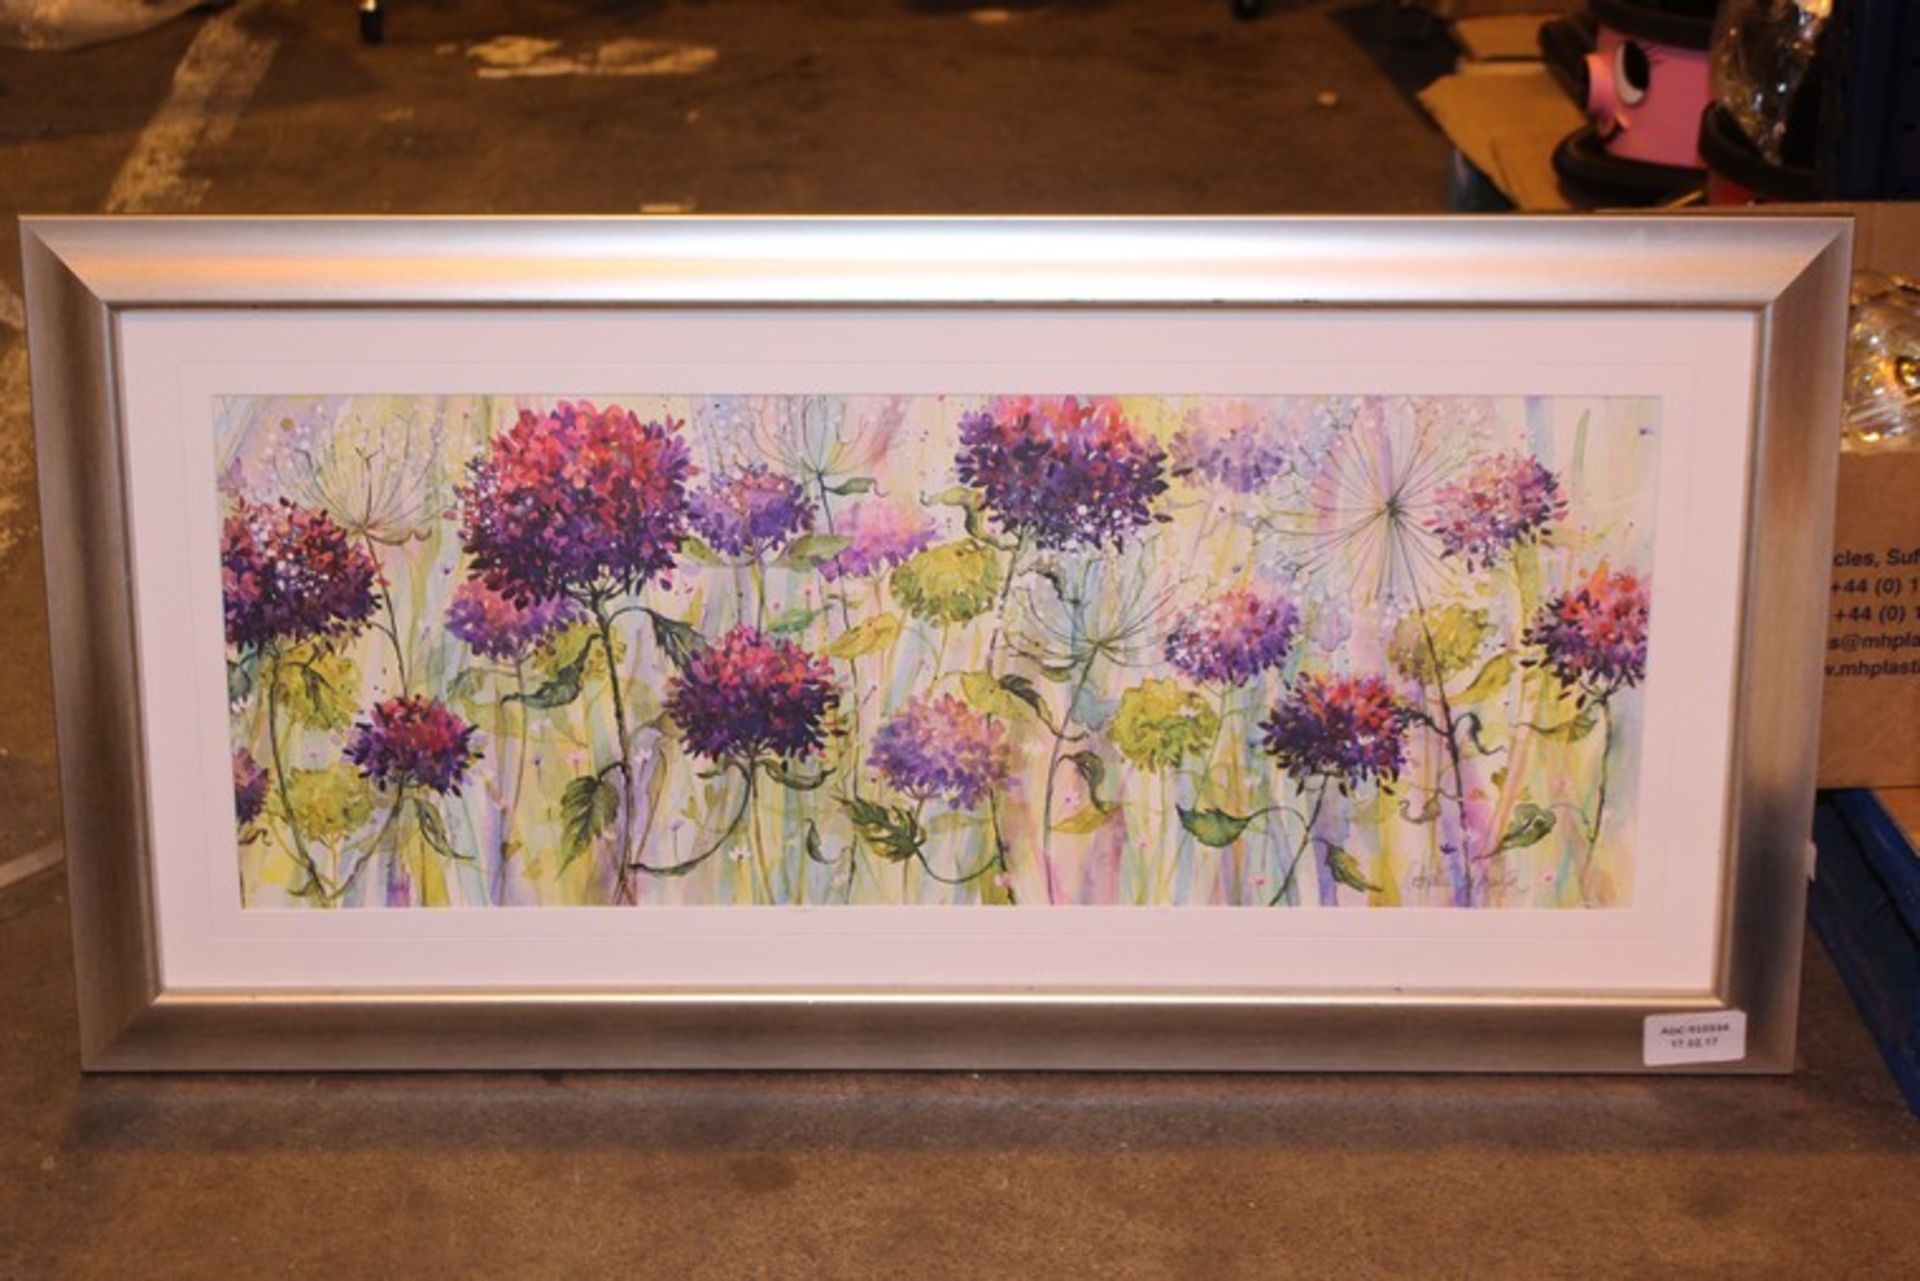 1 x ARTIST CATHERINE STEPHENSON HYDRANGEA BURST CANVAS WALL ART PICTURE RRP £120 *PLEASE NOTE THAT